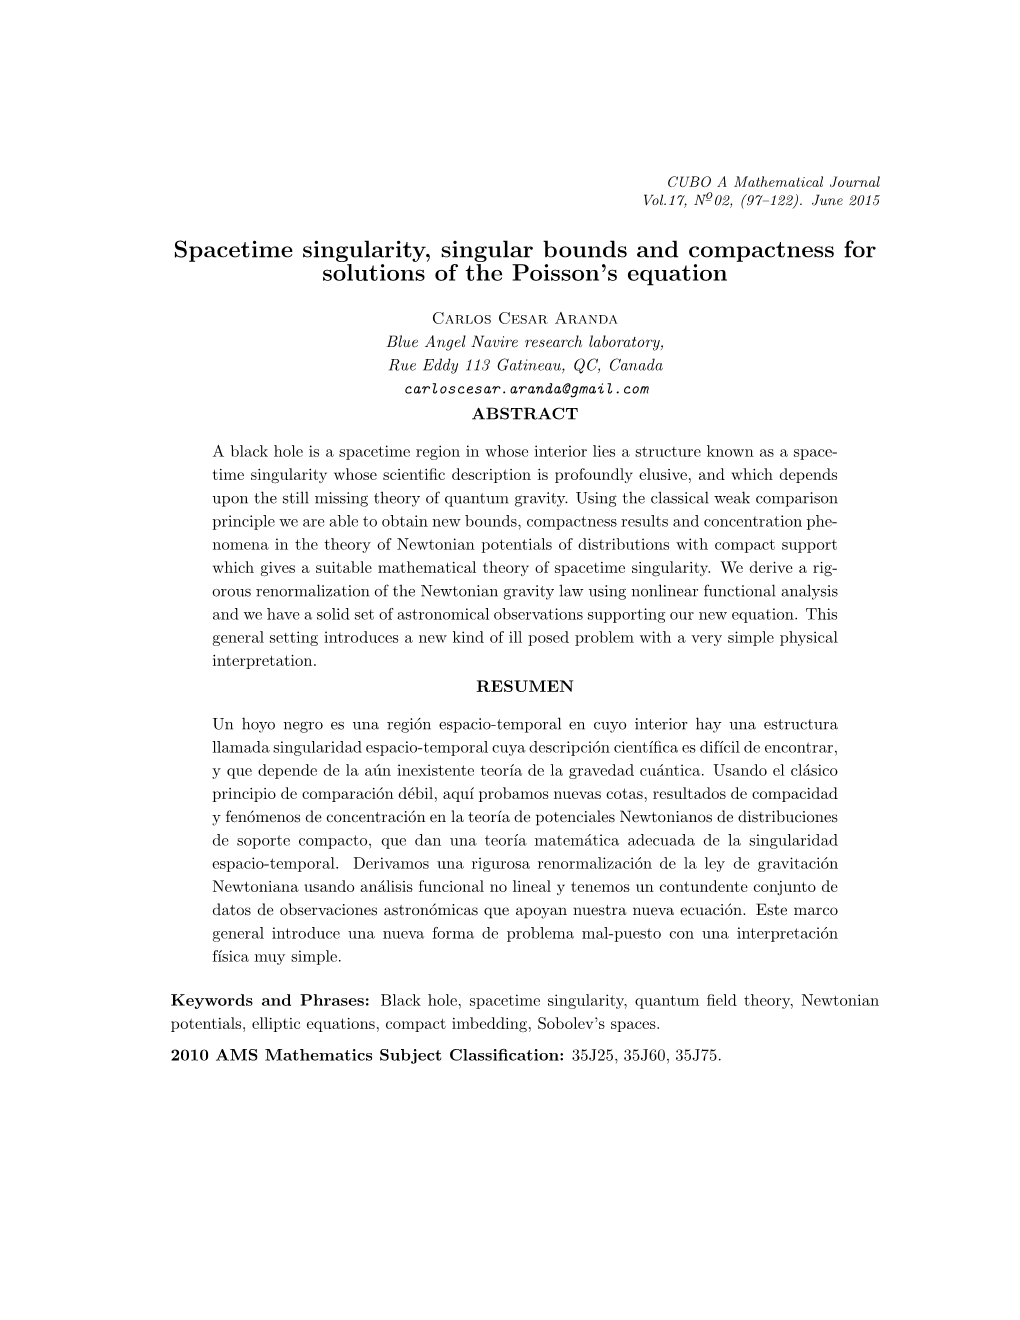 Spacetime Singularity, Singular Bounds and Compactness for Solutions of the Poisson’S Equation